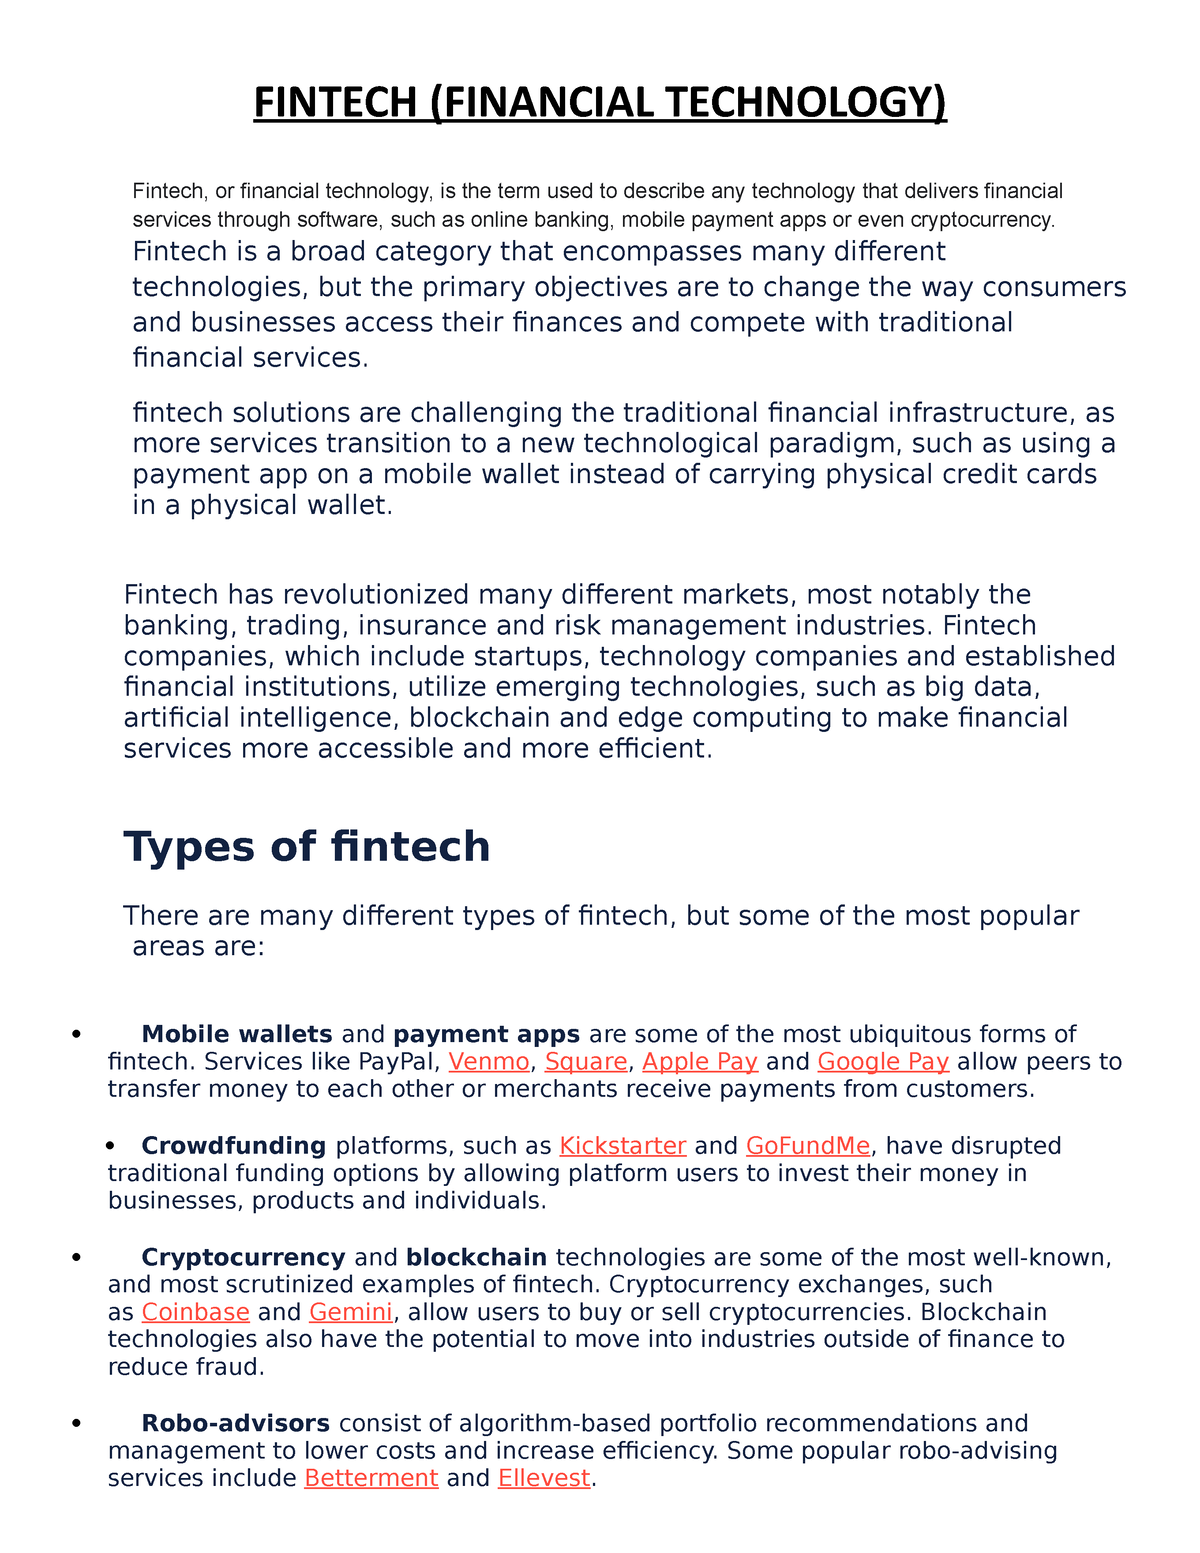 master thesis on fintech